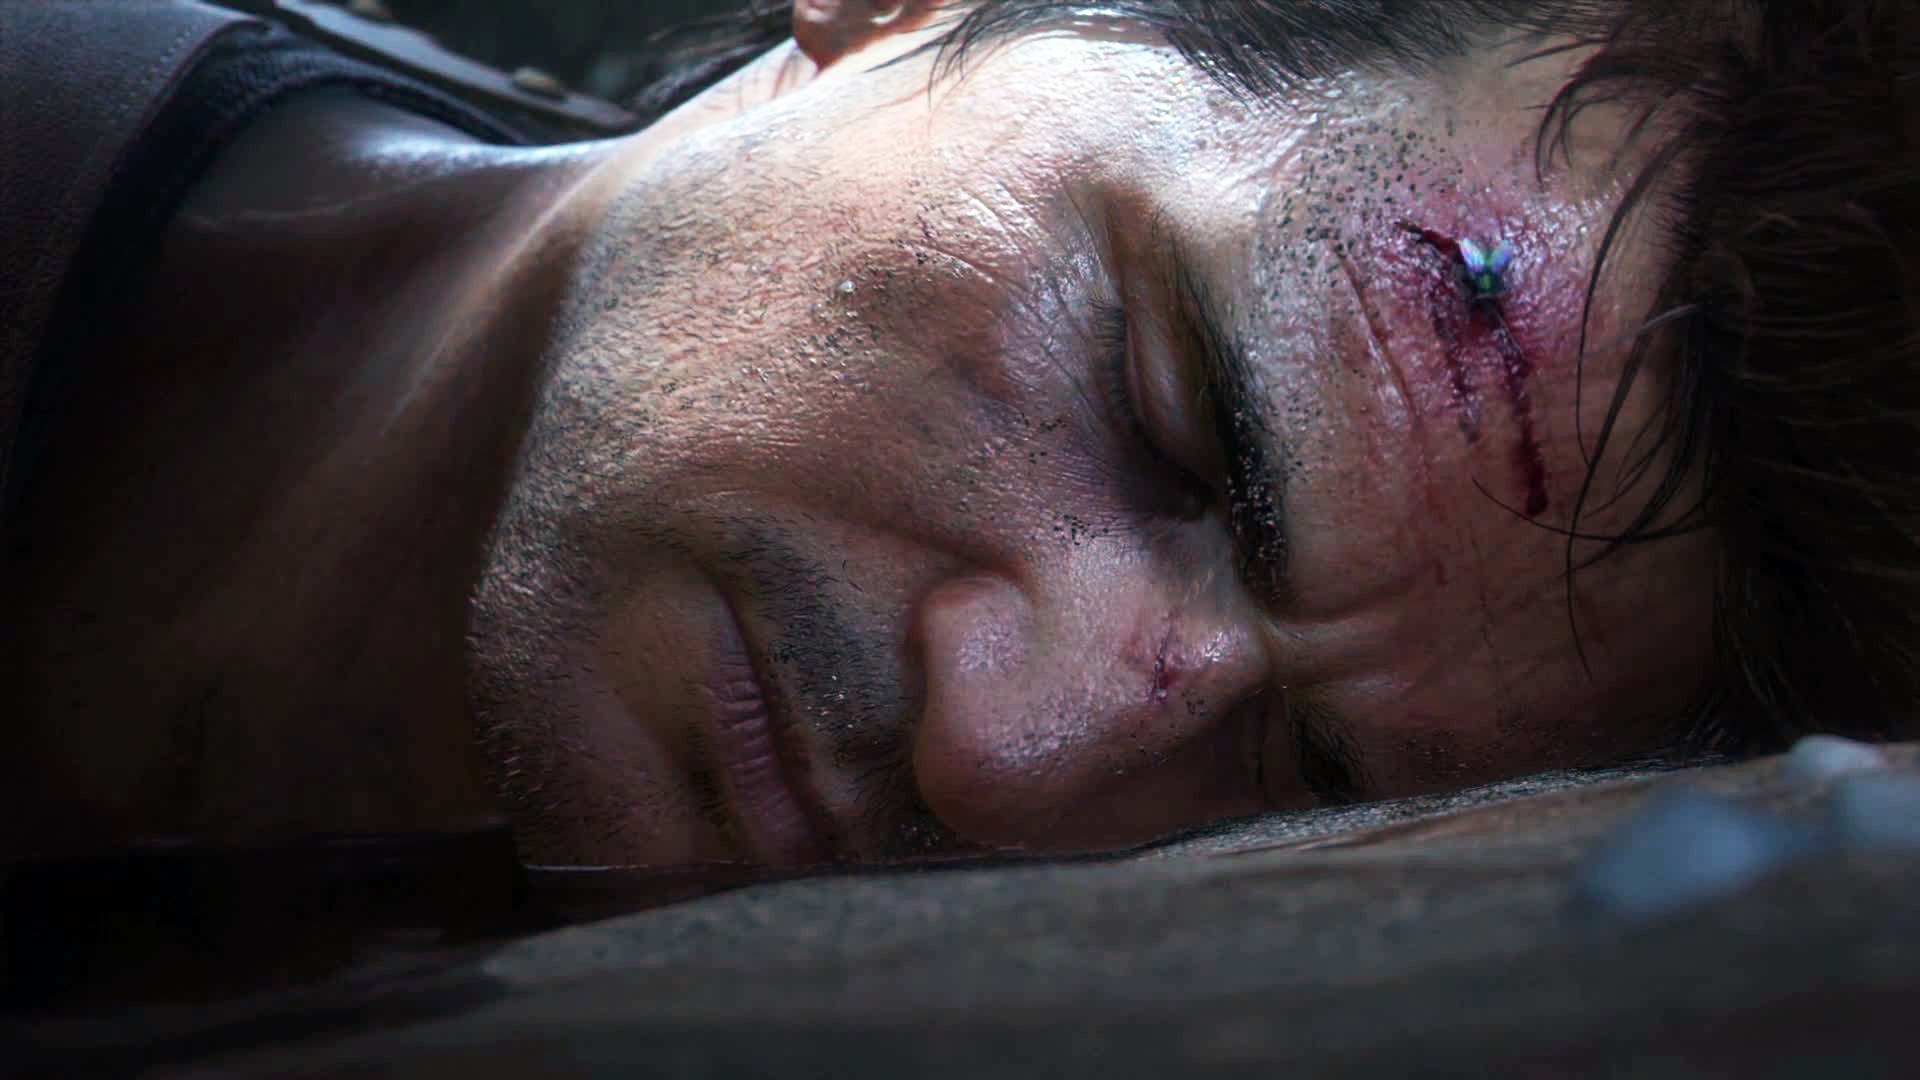 uncharted 4: a thief's end, video game, uncharted